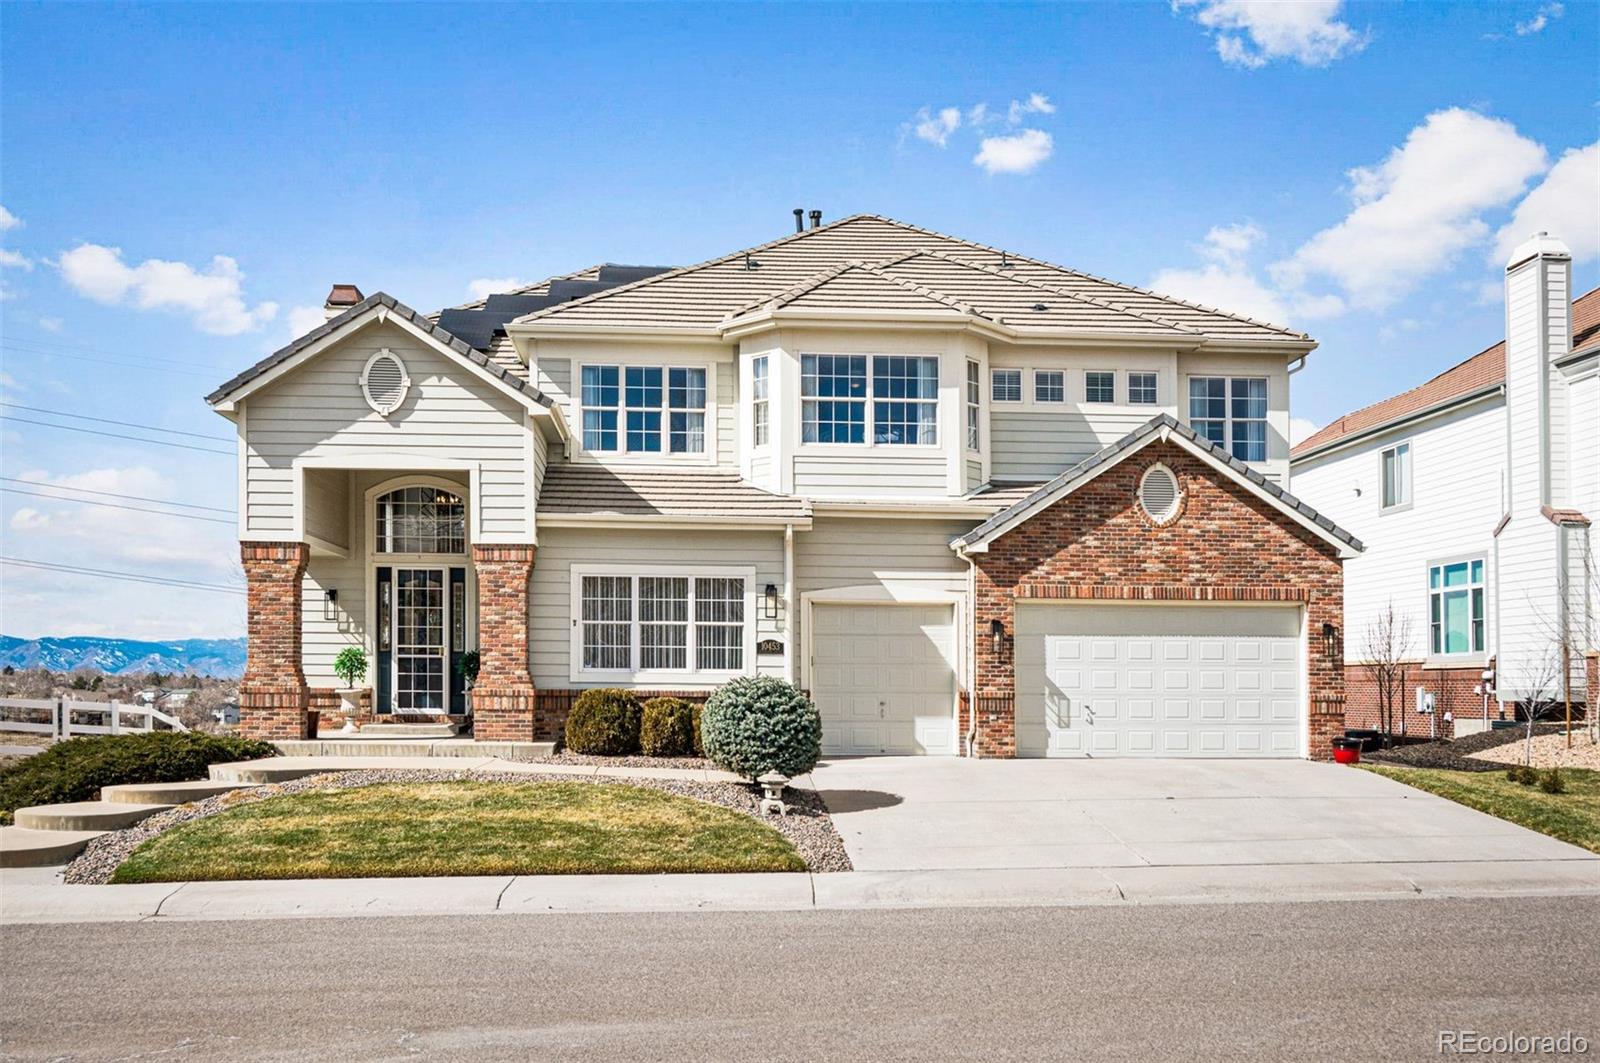 10453  dunsford drive, Lone Tree sold home. Closed on 2024-03-25 for $1,440,000.